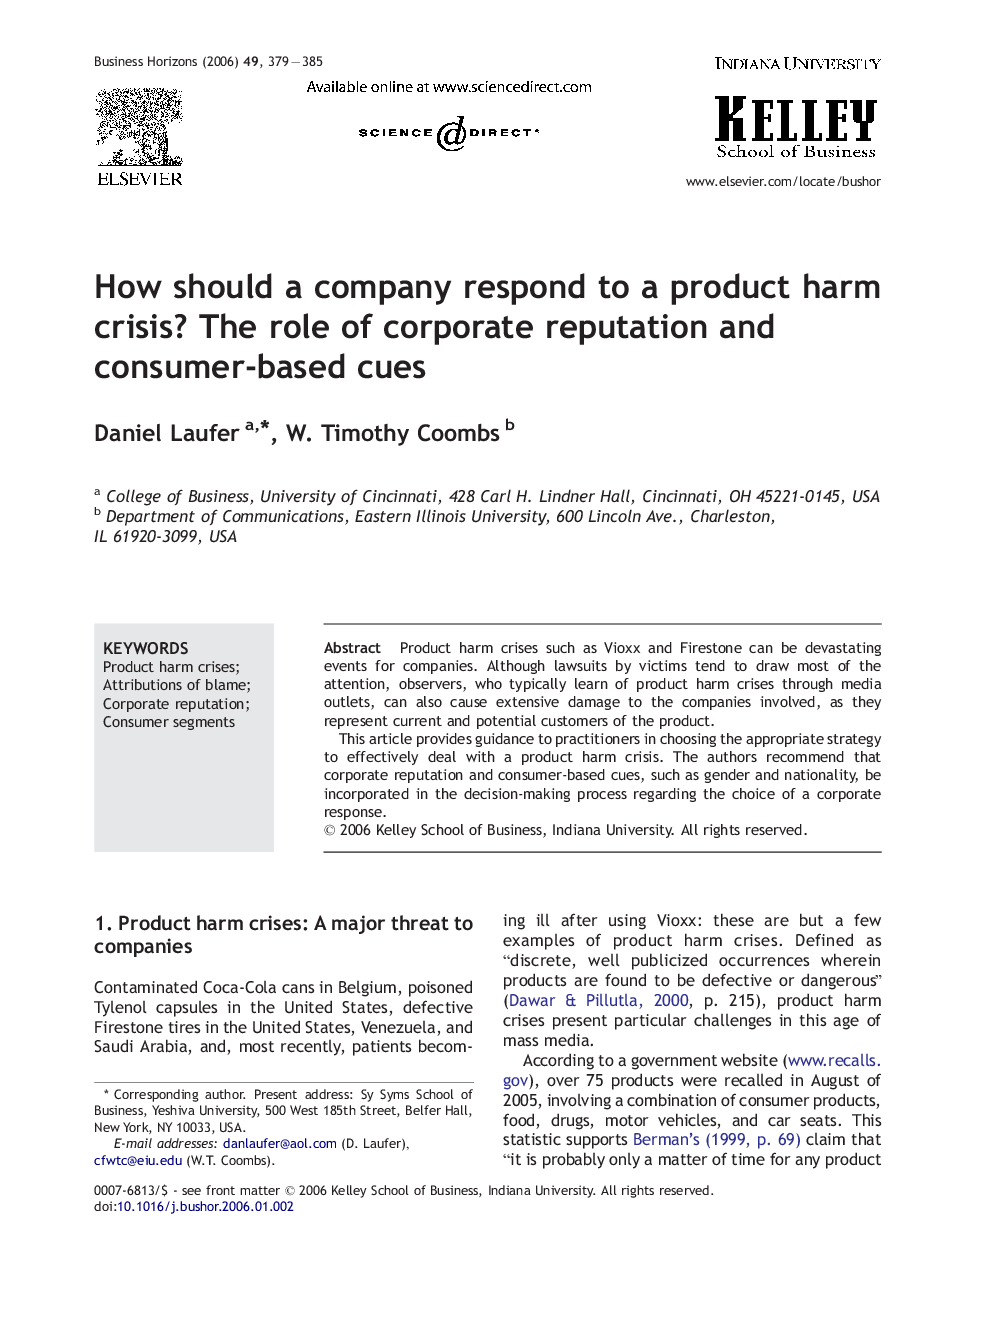 How should a company respond to a product harm crisis? The role of corporate reputation and consumer-based cues